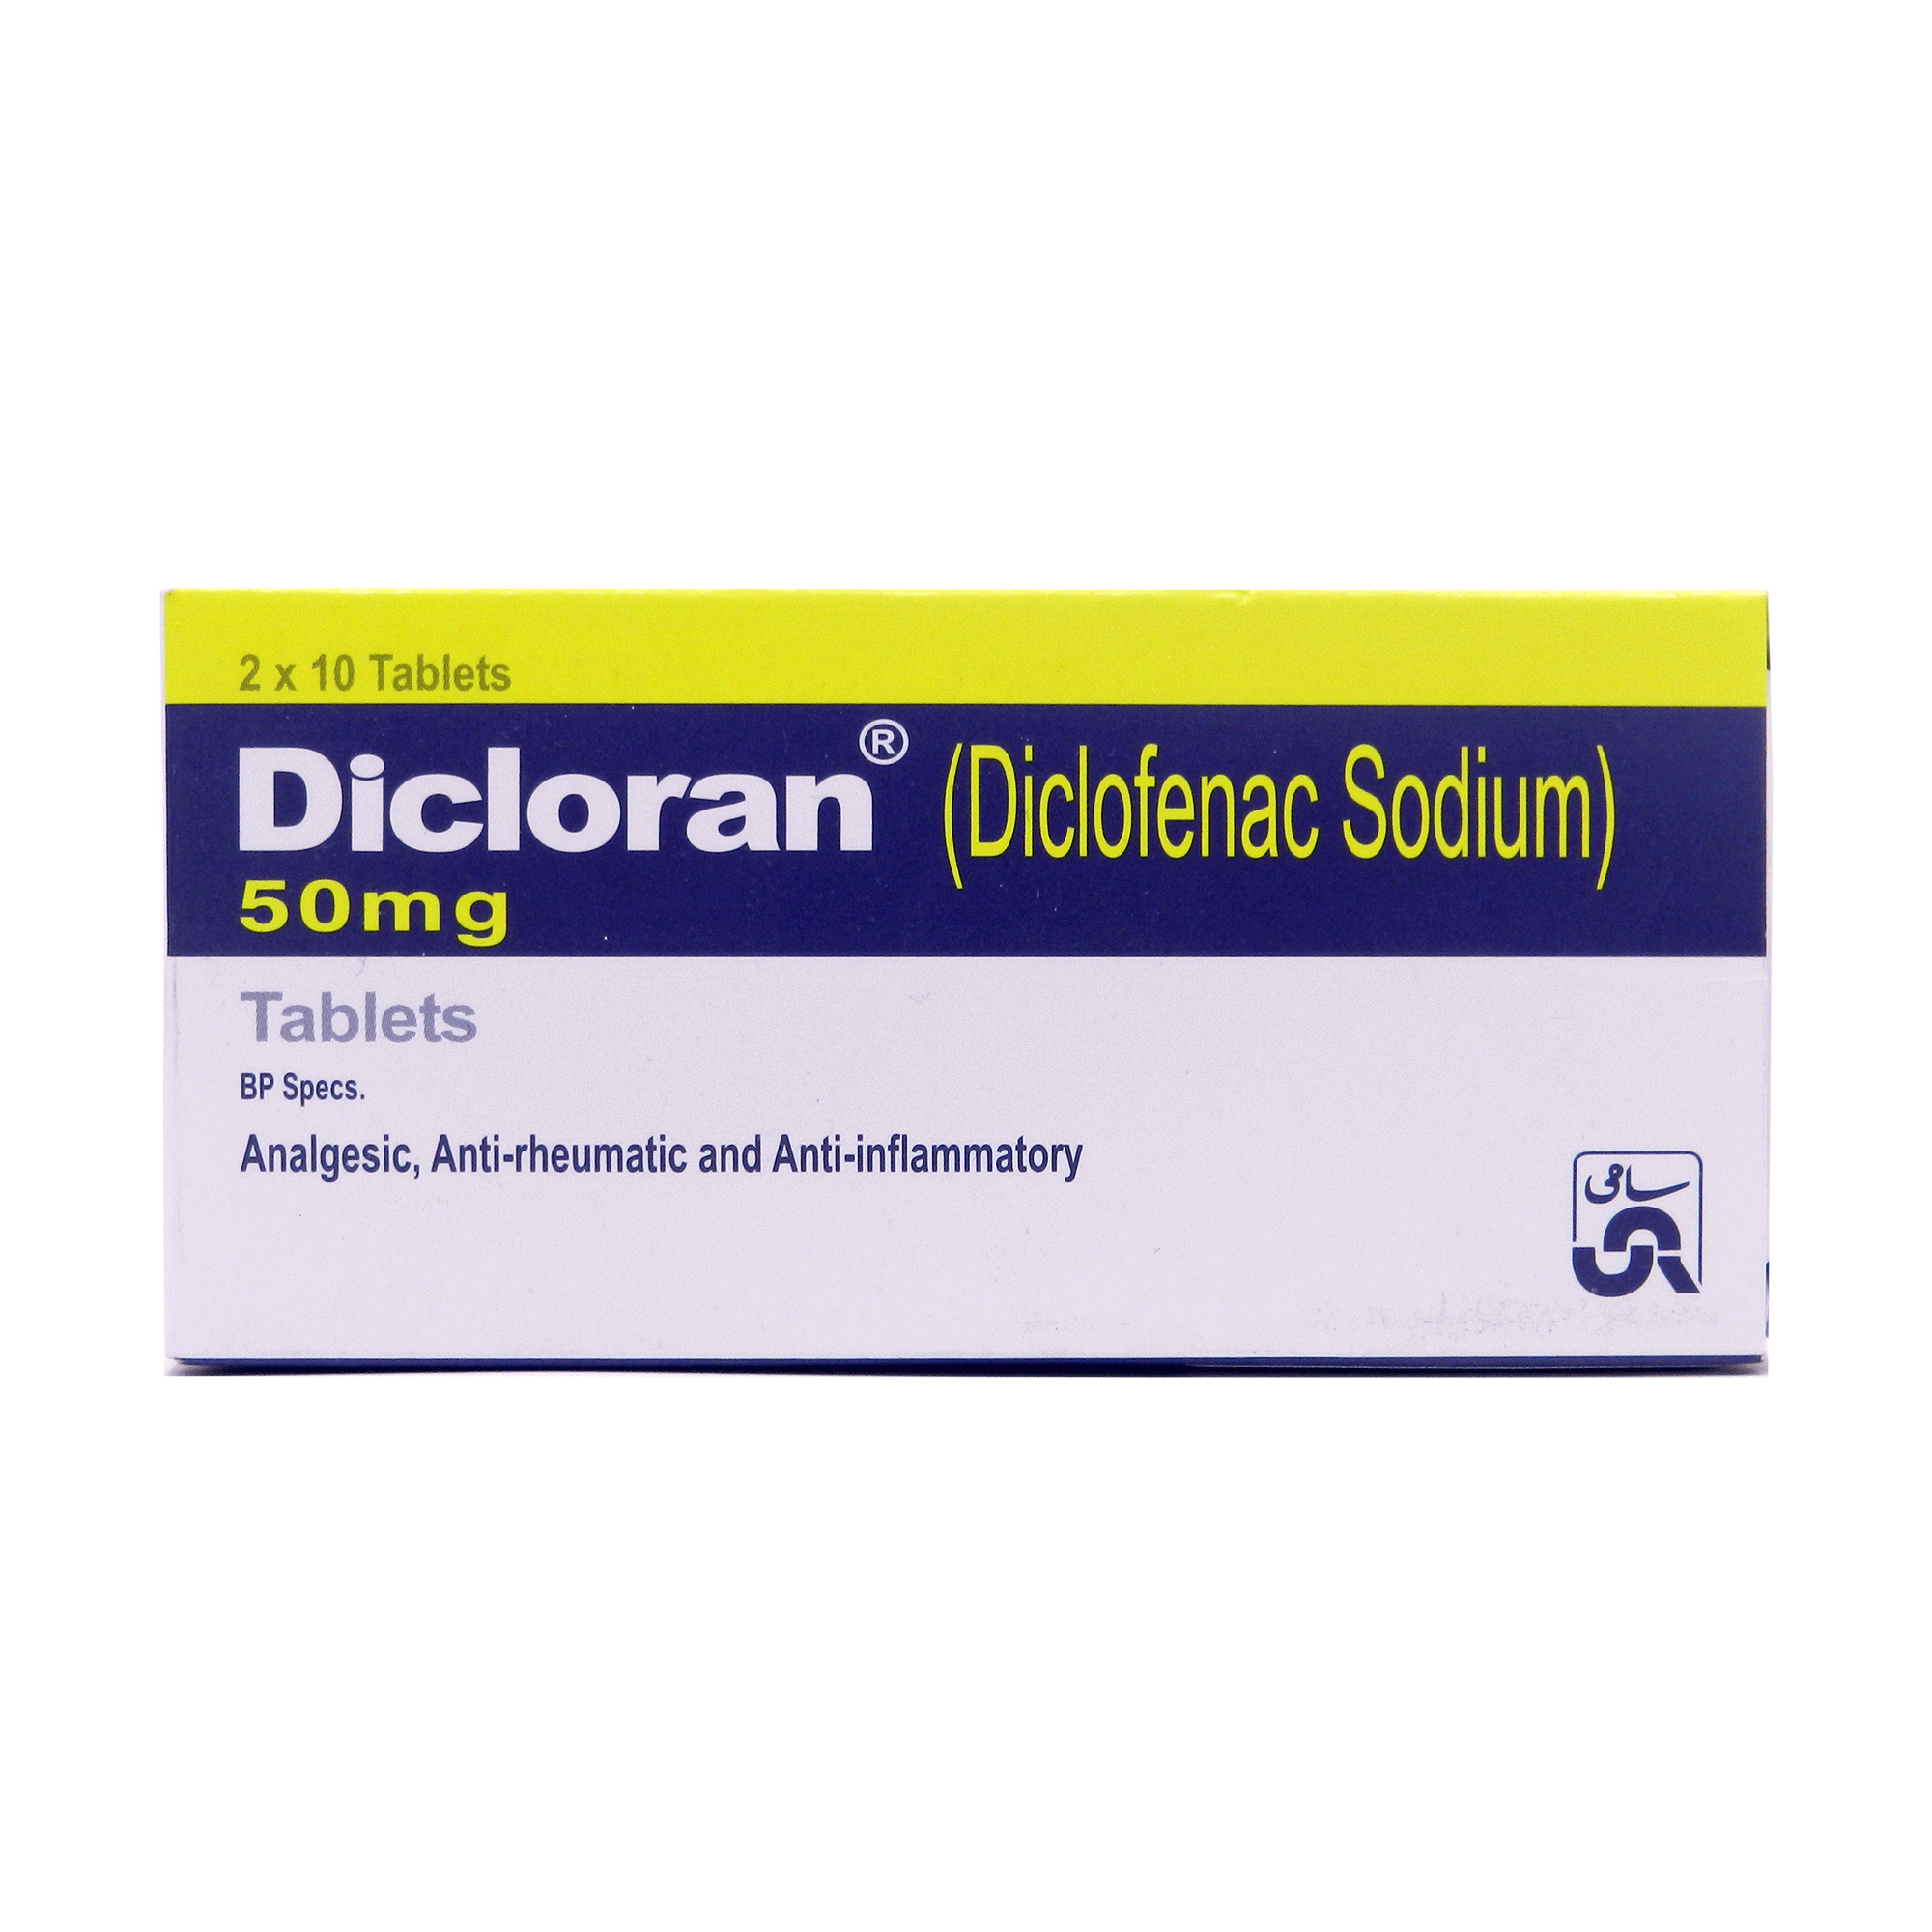 Dicloran Tablet Uses, Side Effects, Price in Pakistan